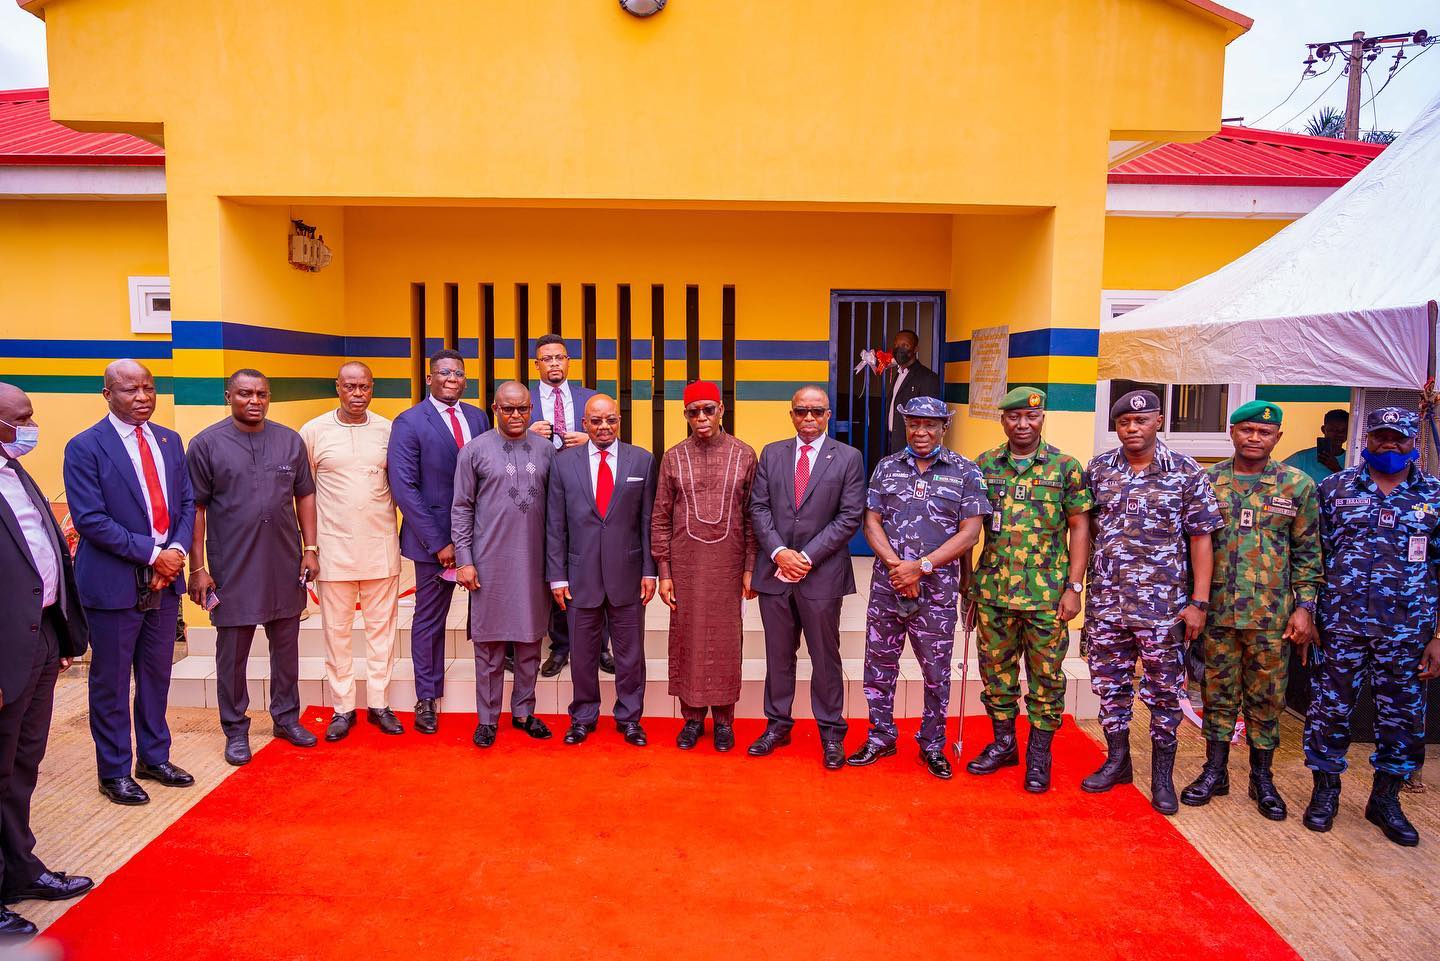 Governor Ifeanyi Okowa, Mr Jim Ovia (middle) in a group photograph after the Inauguration of Projects Executed by Jim Ovia Foundation for the Nigeria Police Force in Agbor